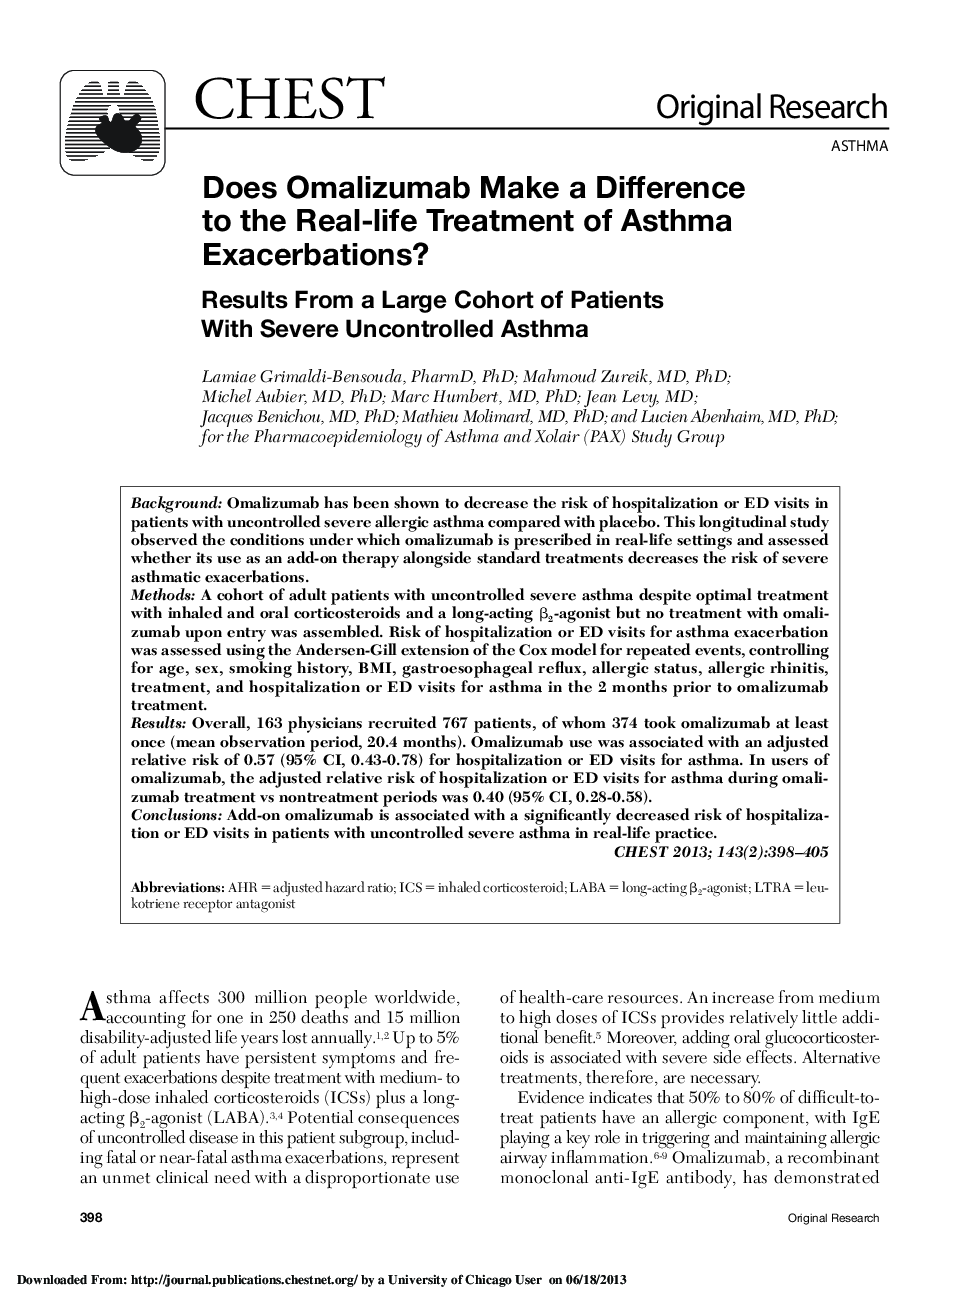 Does Omalizumab Make a Difference to the Real-life Treatment of Asthma Exacerbations?